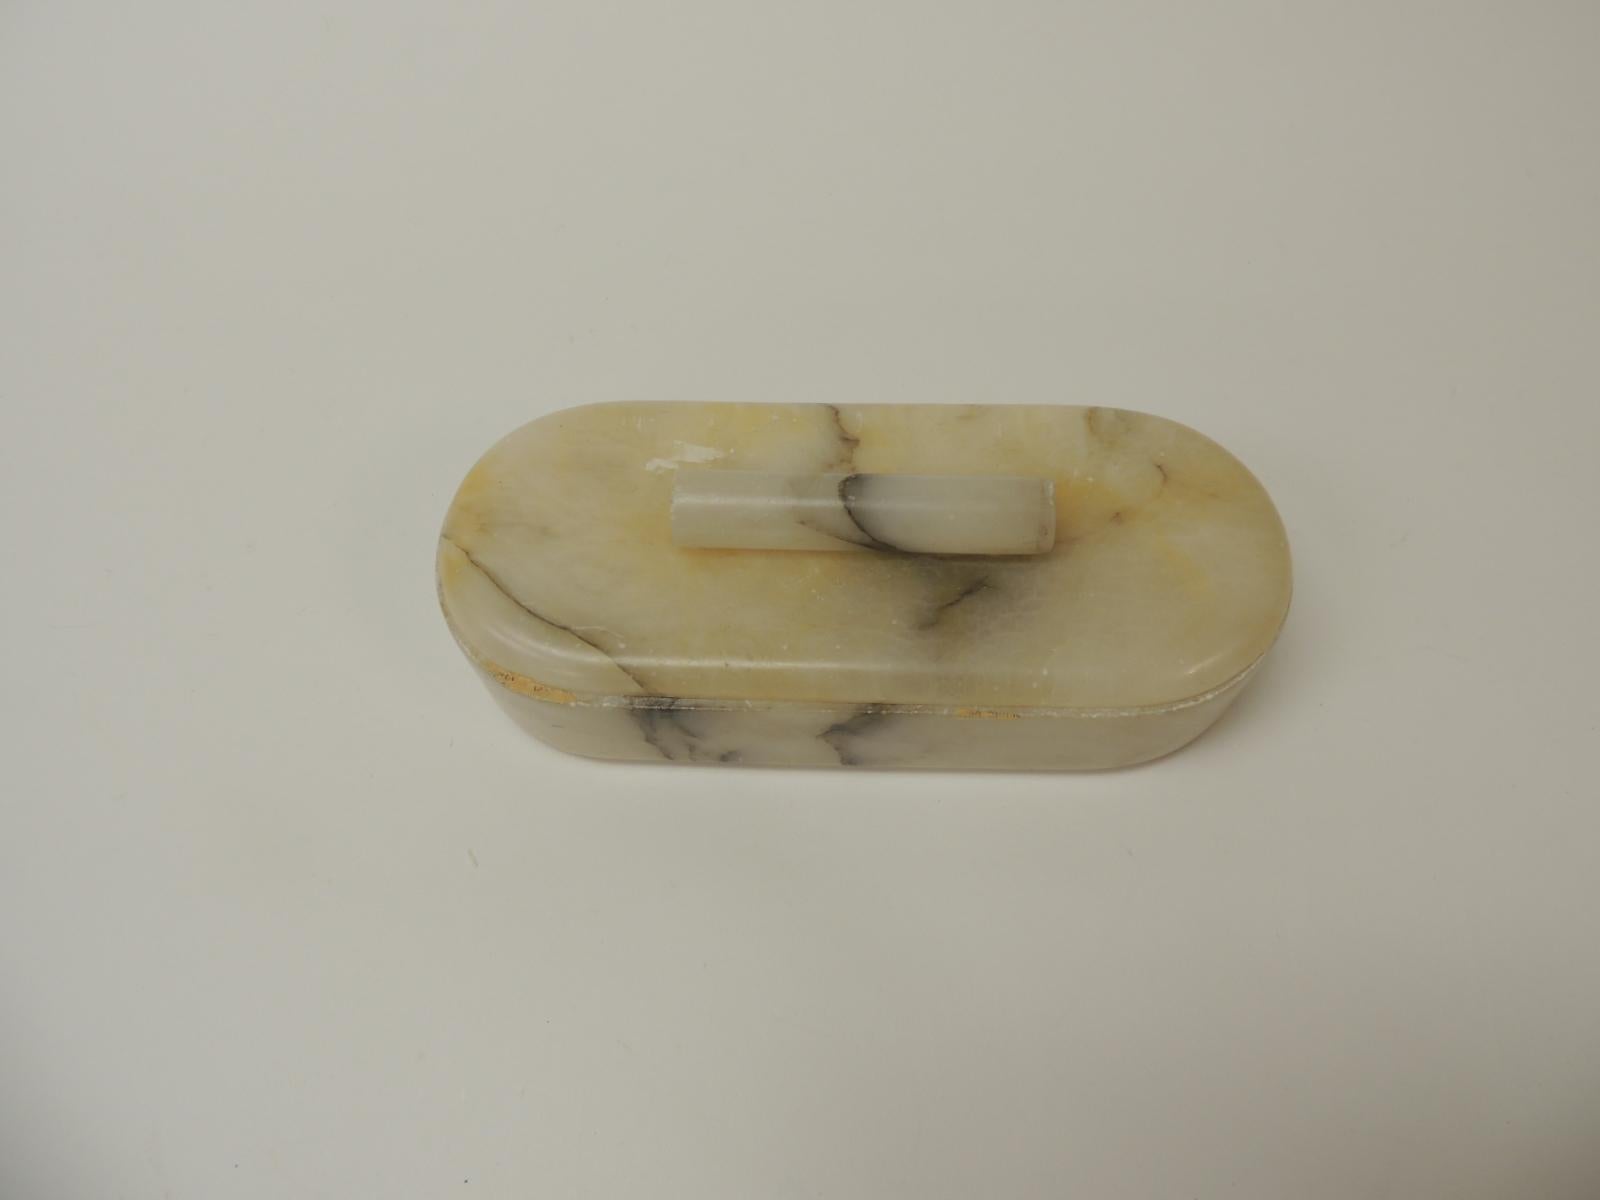 Vintage vanity handcrafted Alabaster Art Deco oval box
Oval hand-crafted natural alabaster color with lid and round handle. Alabaster box perfect for a vanity table.
Size: 9” W x 4” D x 3” H.

 